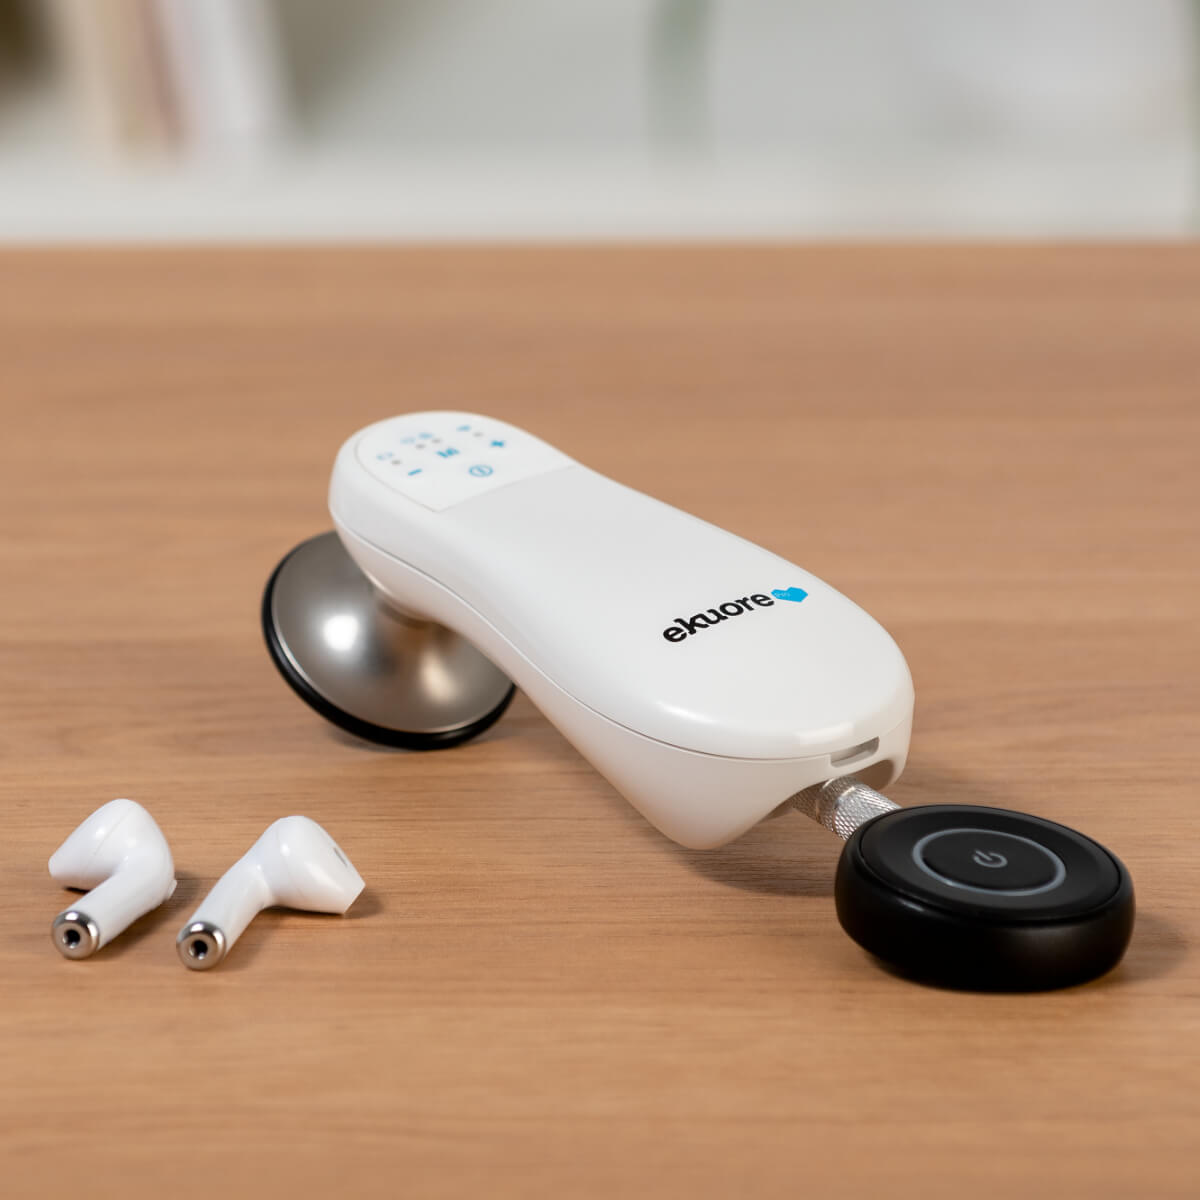 Ekuore Amplified Stethoscope for hearing loss